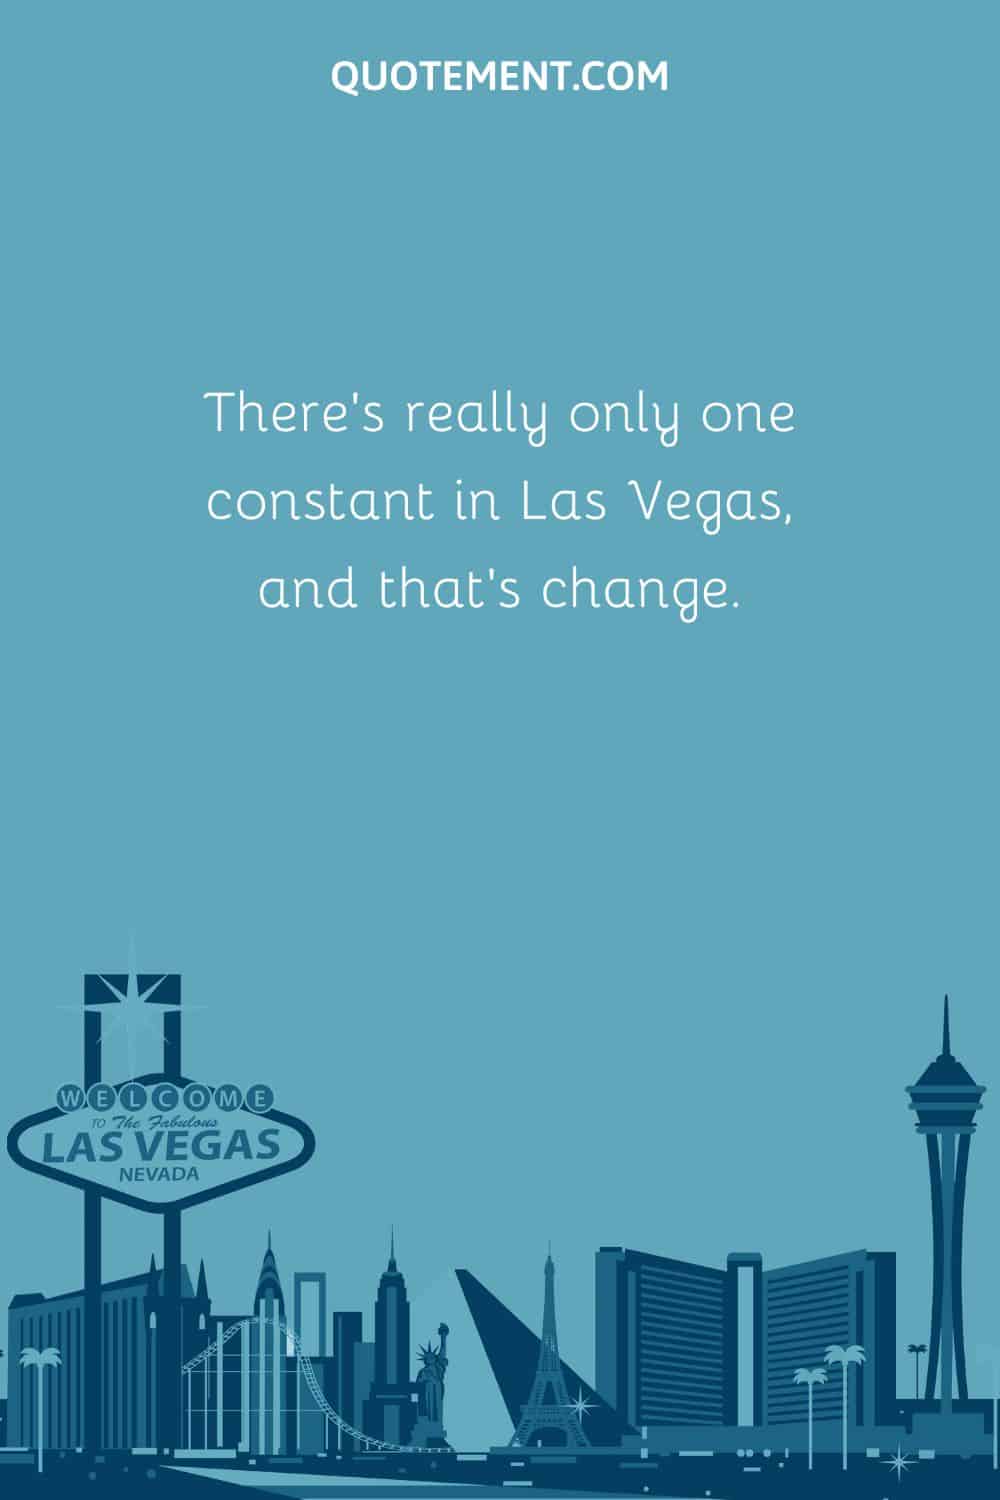 There’s really only one constant in Las Vegas, and that’s change.